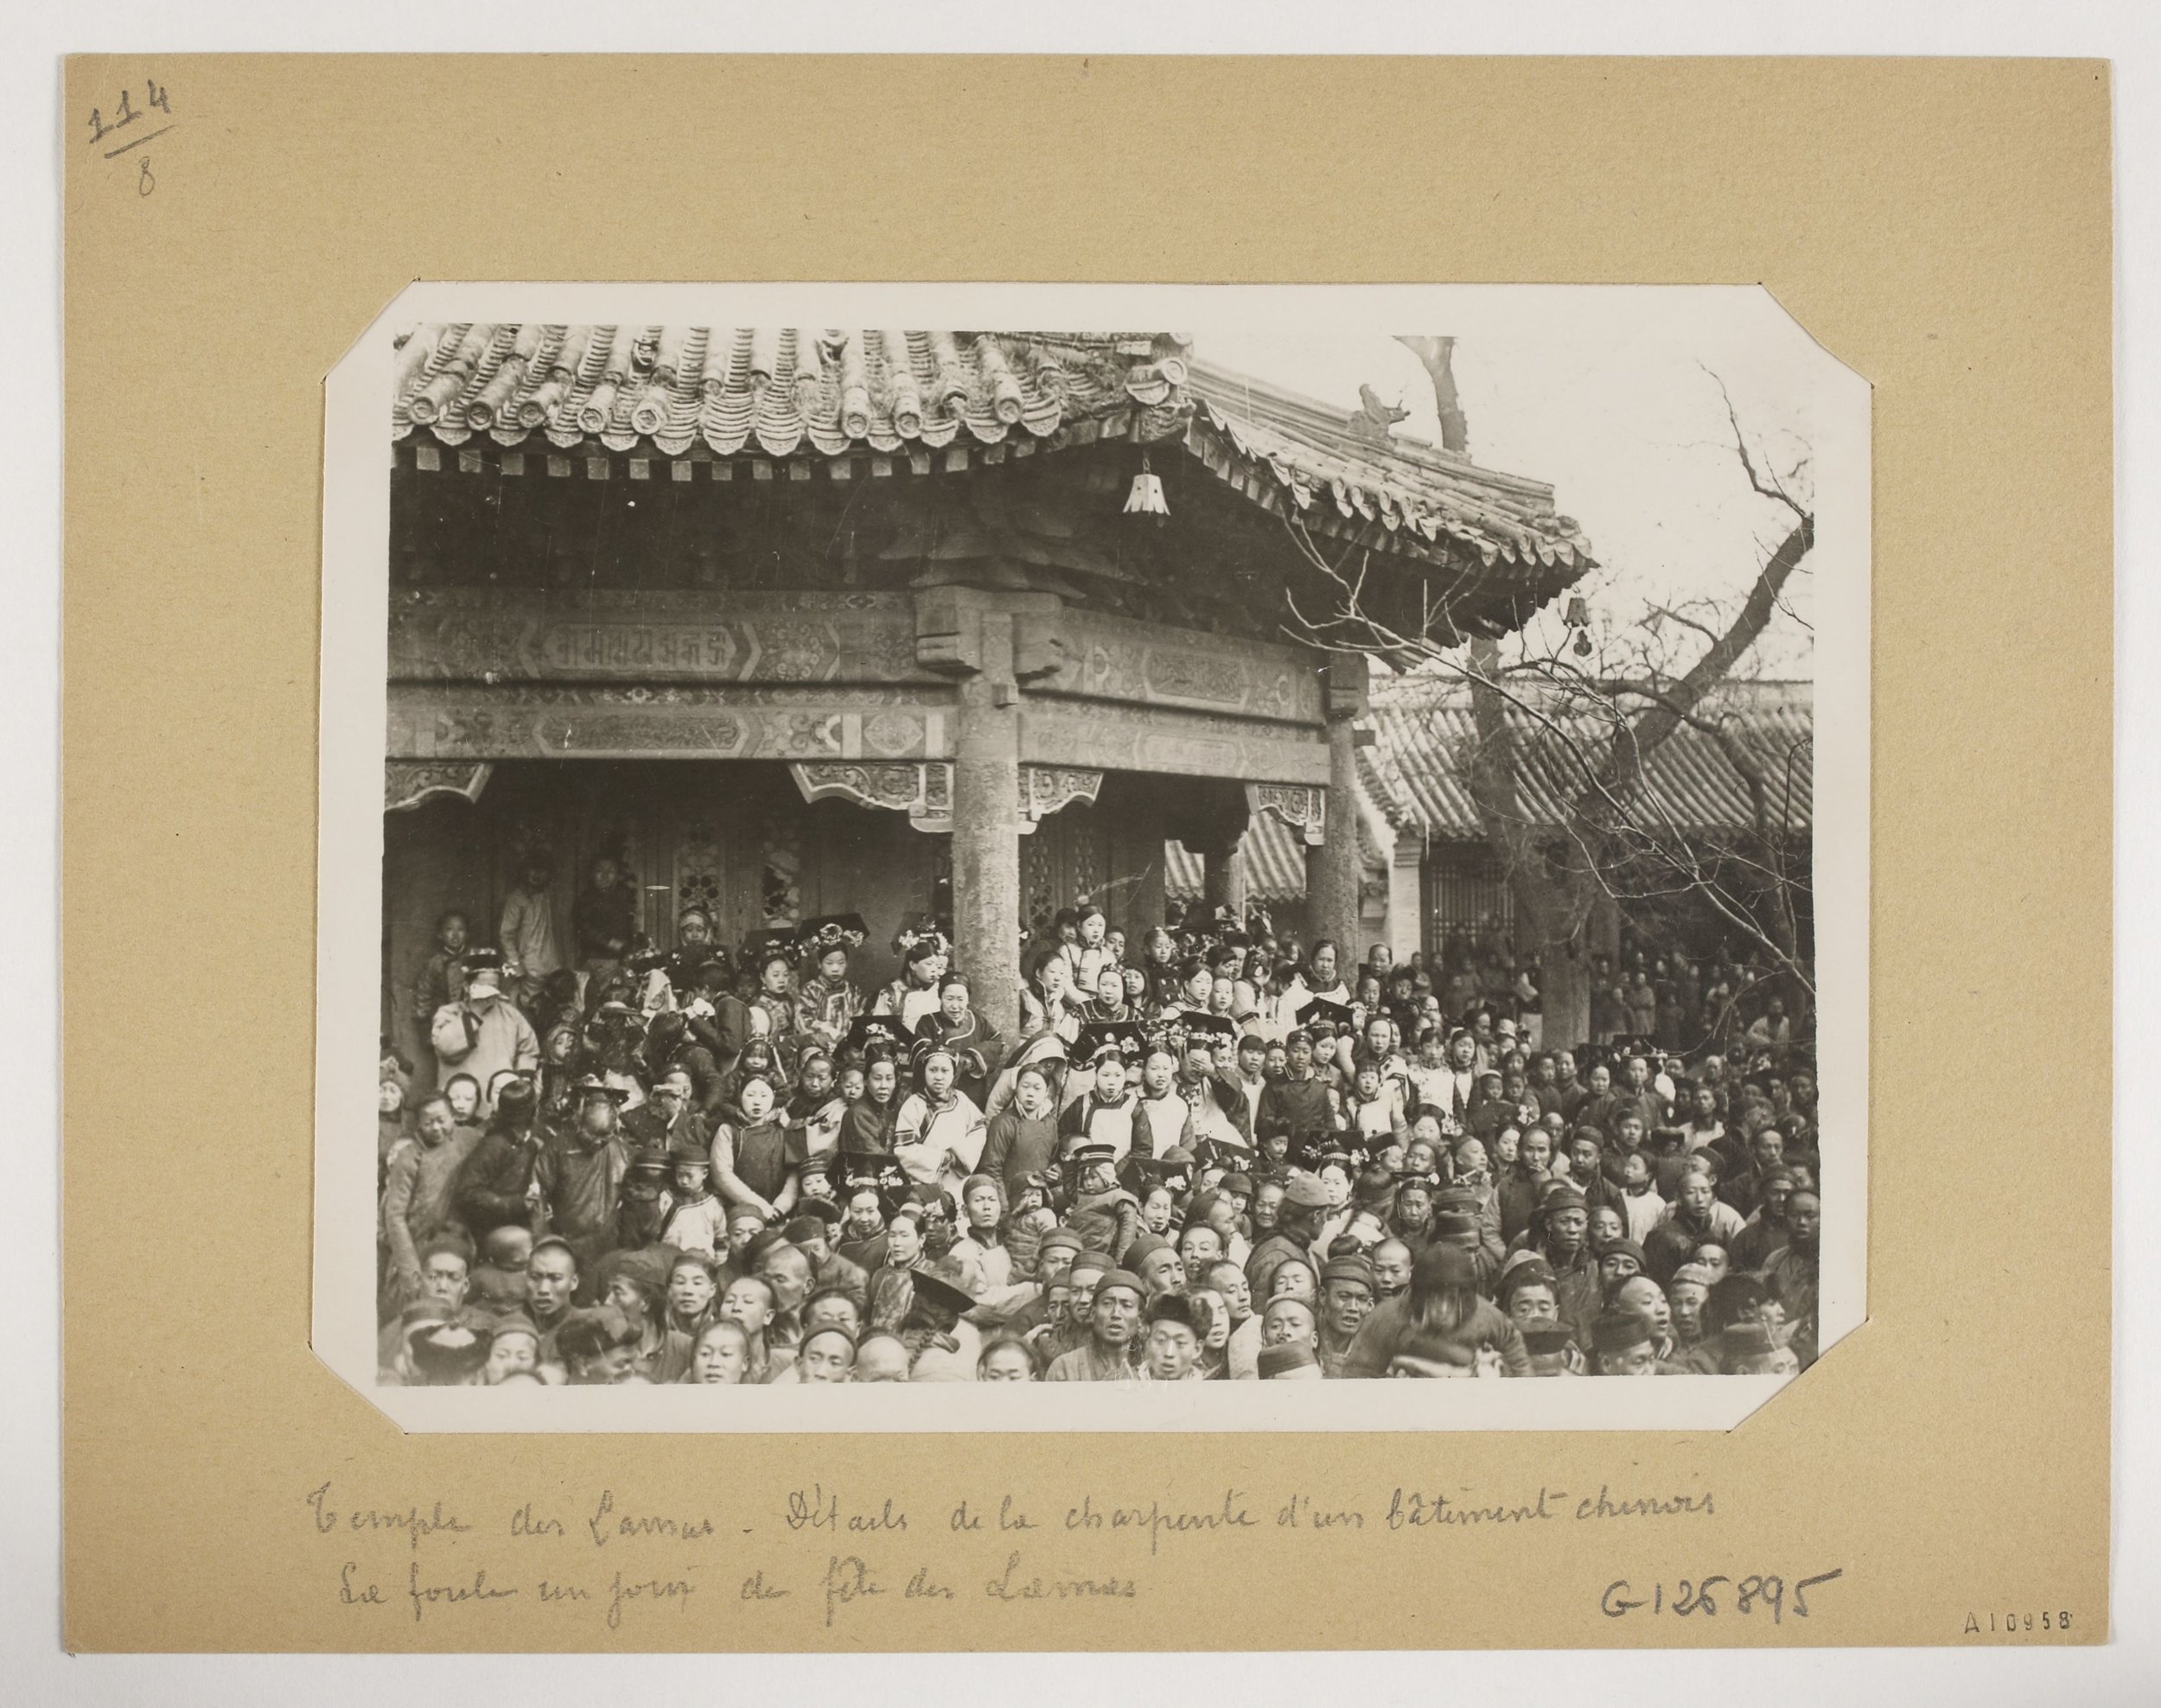 firmin laribe china 1904 1910 photography of china 2 - Firmin Laribe | Archive | Portrait | Black and white photography | Costumes | Architectural photography - Firmin Laribe